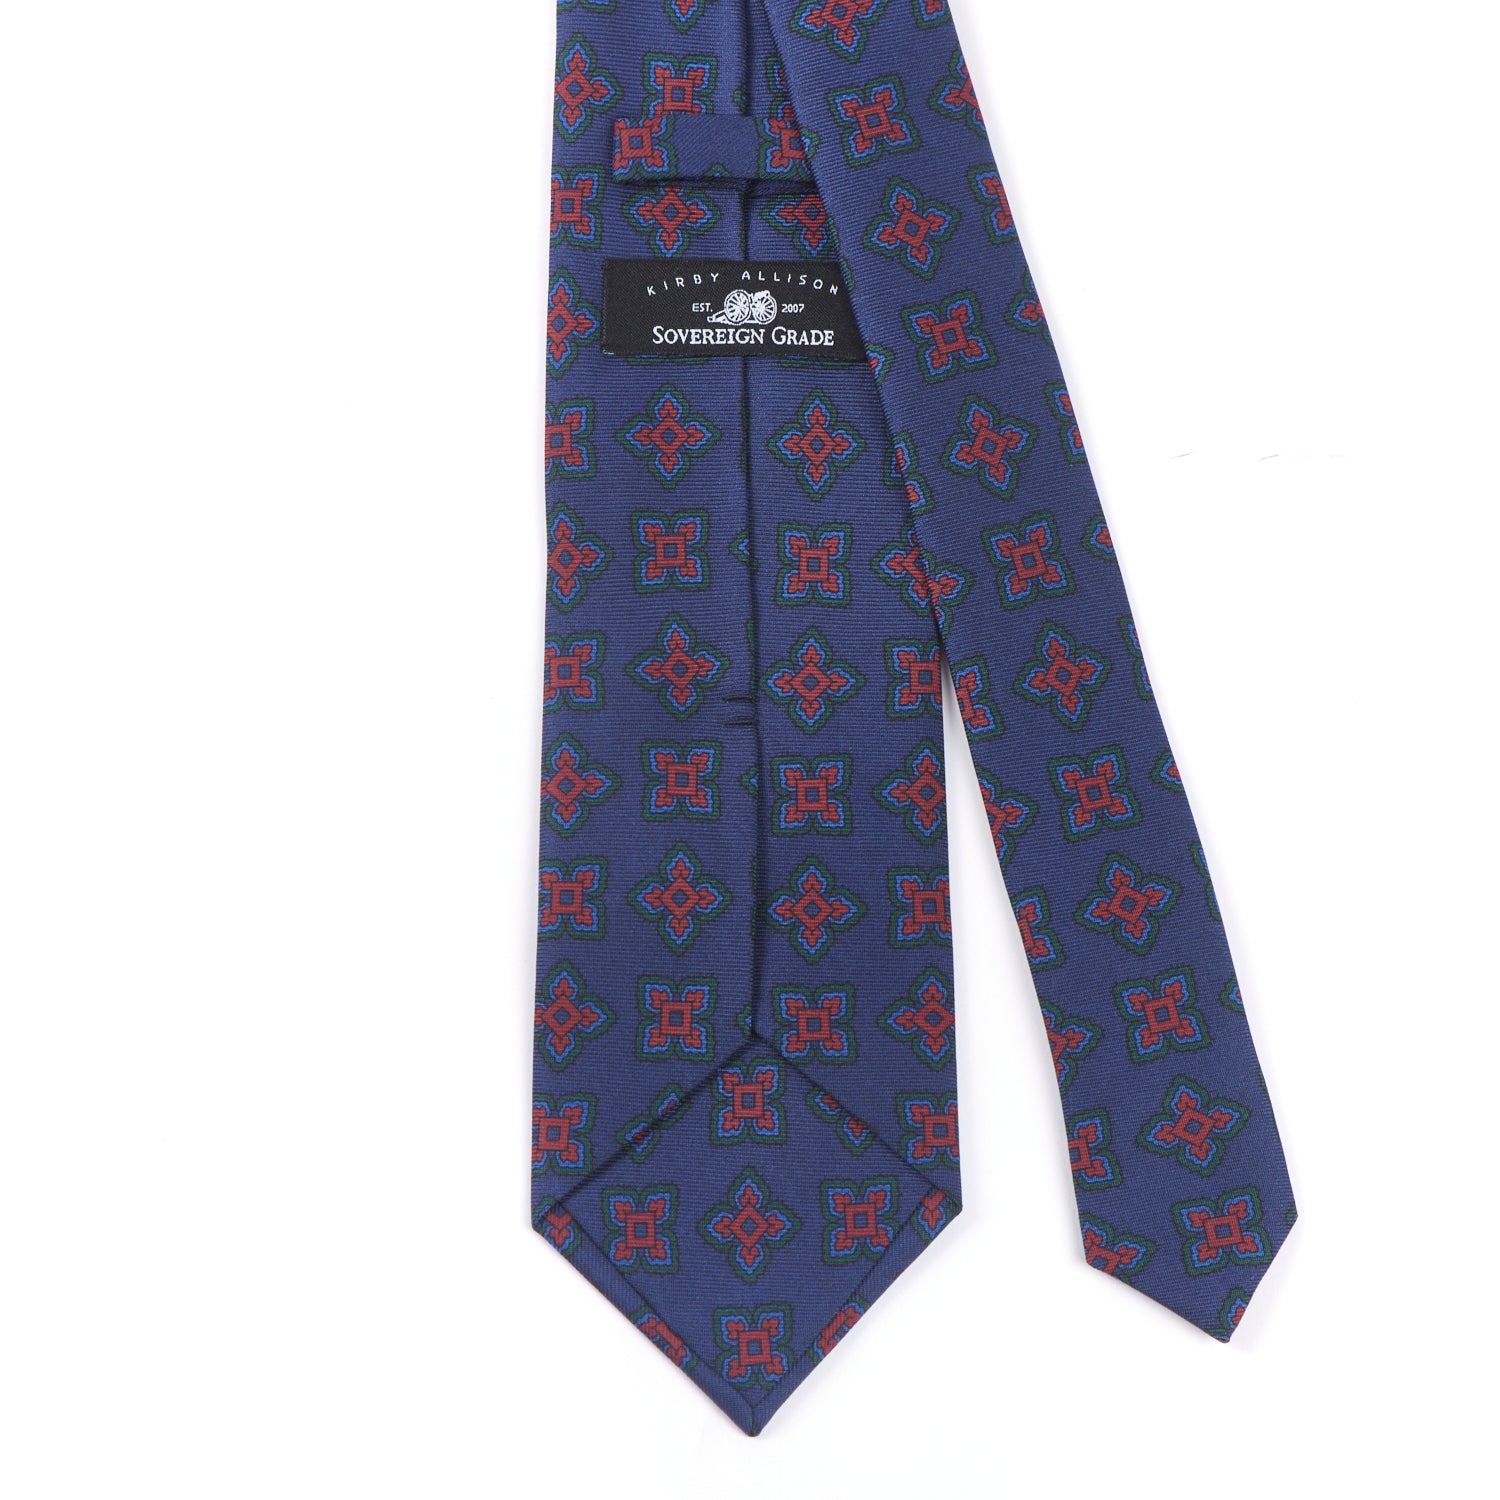 A Sovereign Grade Navy Large Medallion Ancient Madder Tie, 150cm by KirbyAllison.com, with blue and red designs, known for its longevity.